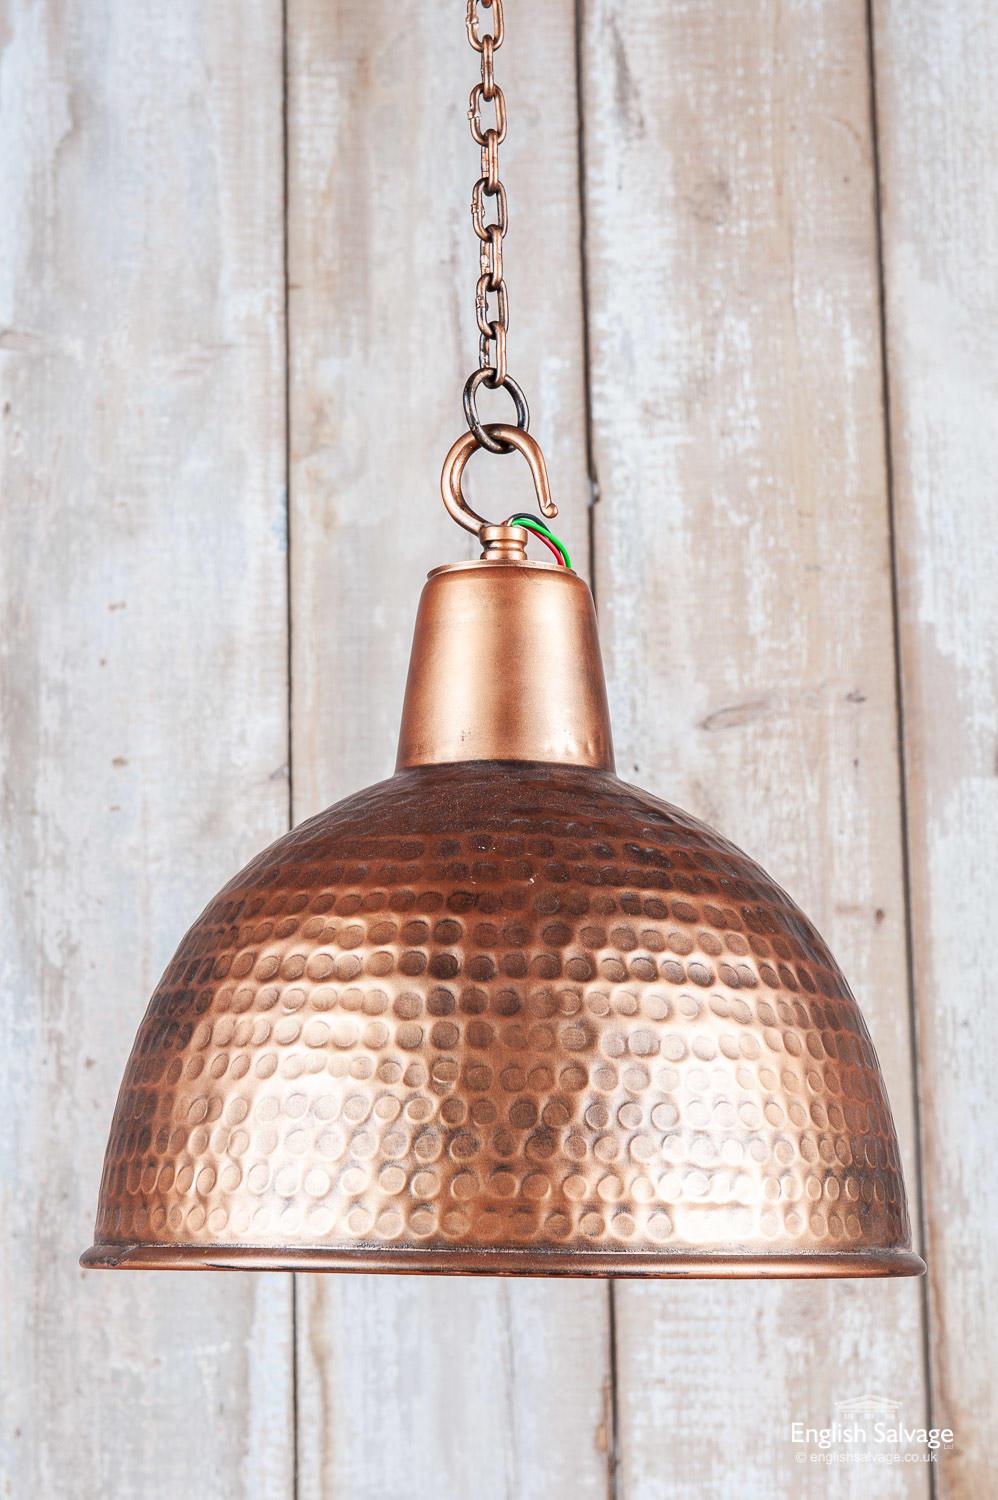 Copper colored aluminium ceiling light with attractive hammered dimpled finish. The inside of the shade is an attractive bright copper color. It is wired to take a small Edison [screw-in] bulb, and comes complete with chain and ceiling rose.